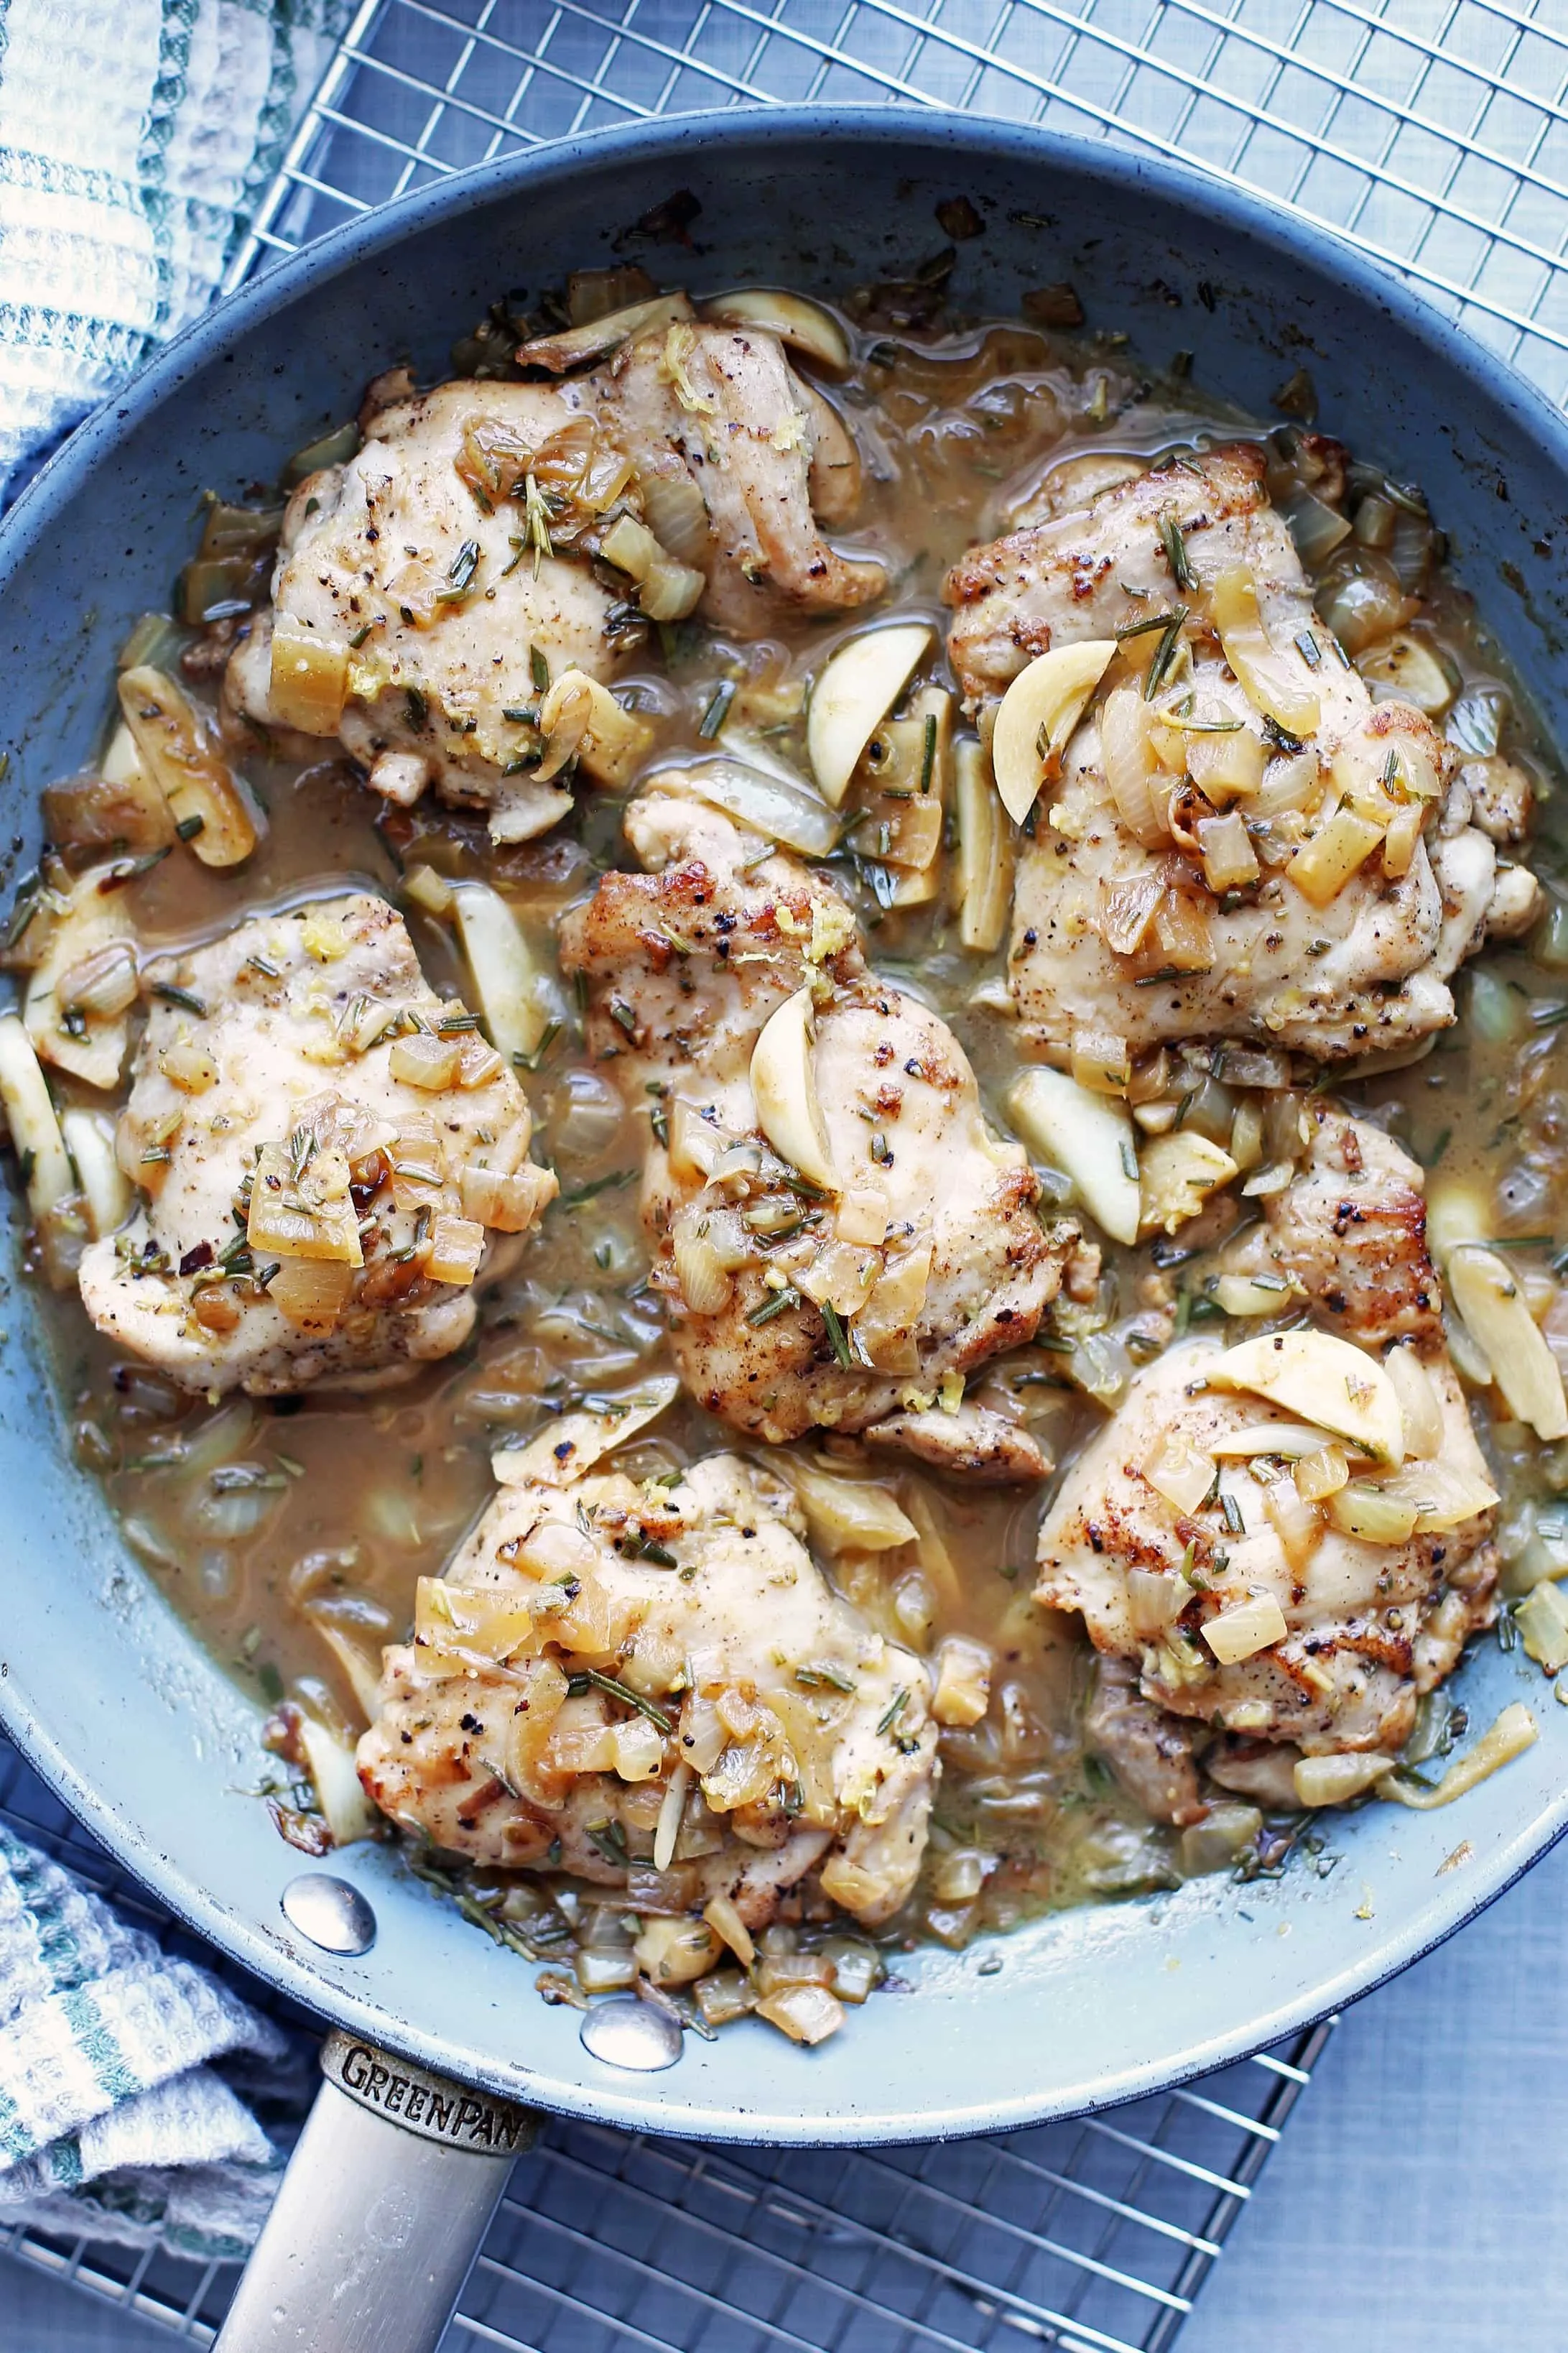 Six rosemary garlic chicken thighs covered with a garlic and chicken broth sauce in a large blue pan.